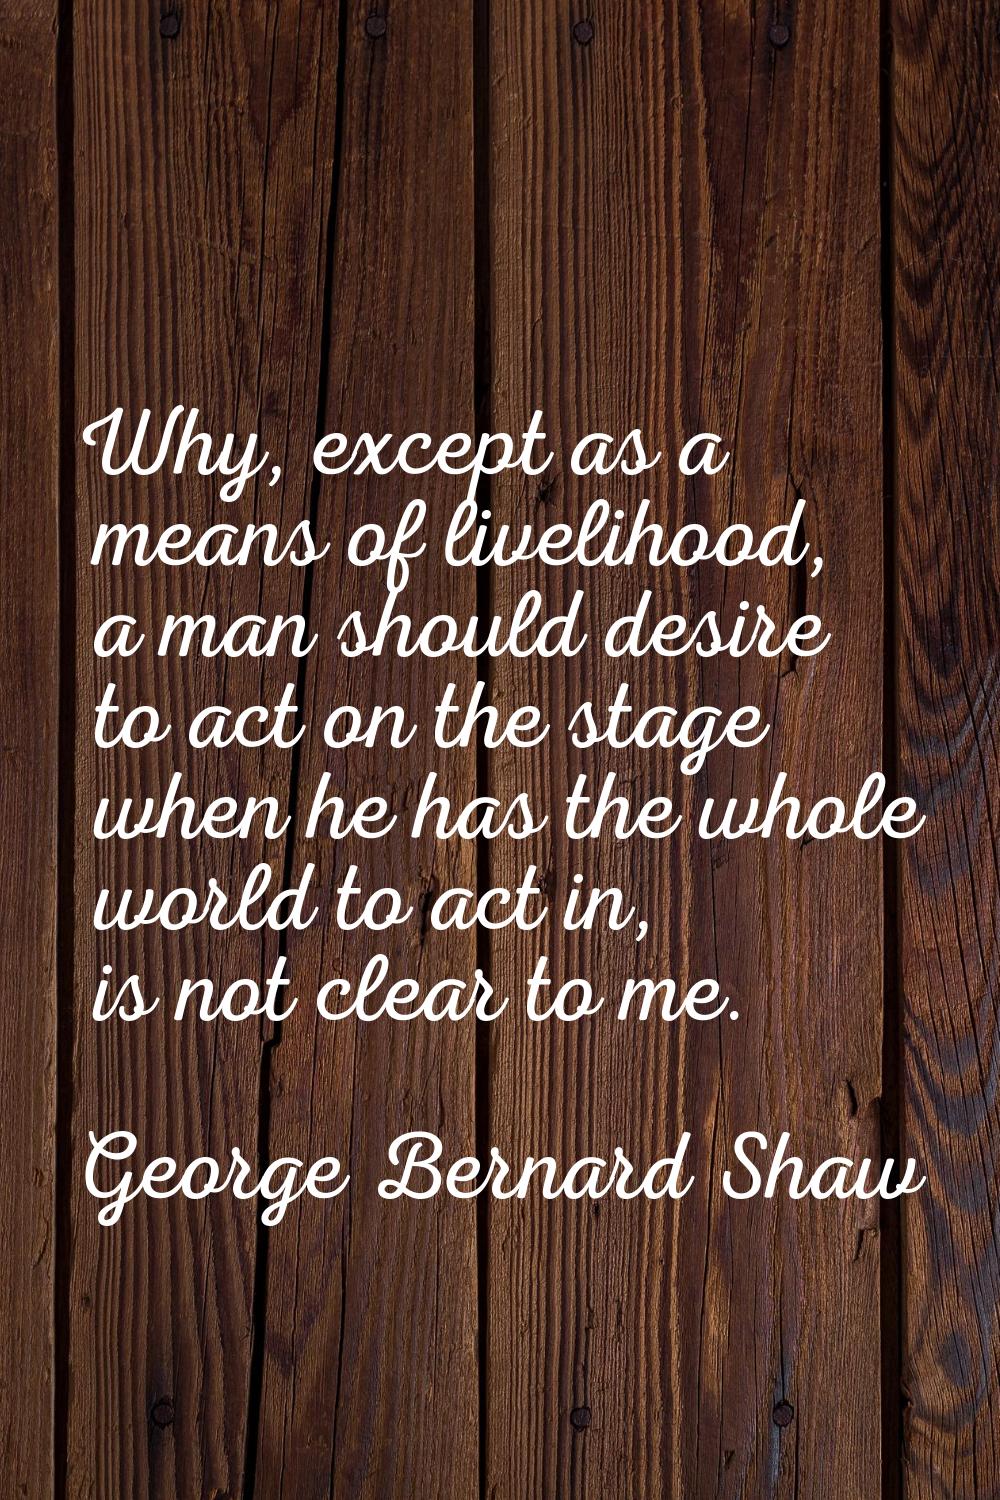 Why, except as a means of livelihood, a man should desire to act on the stage when he has the whole